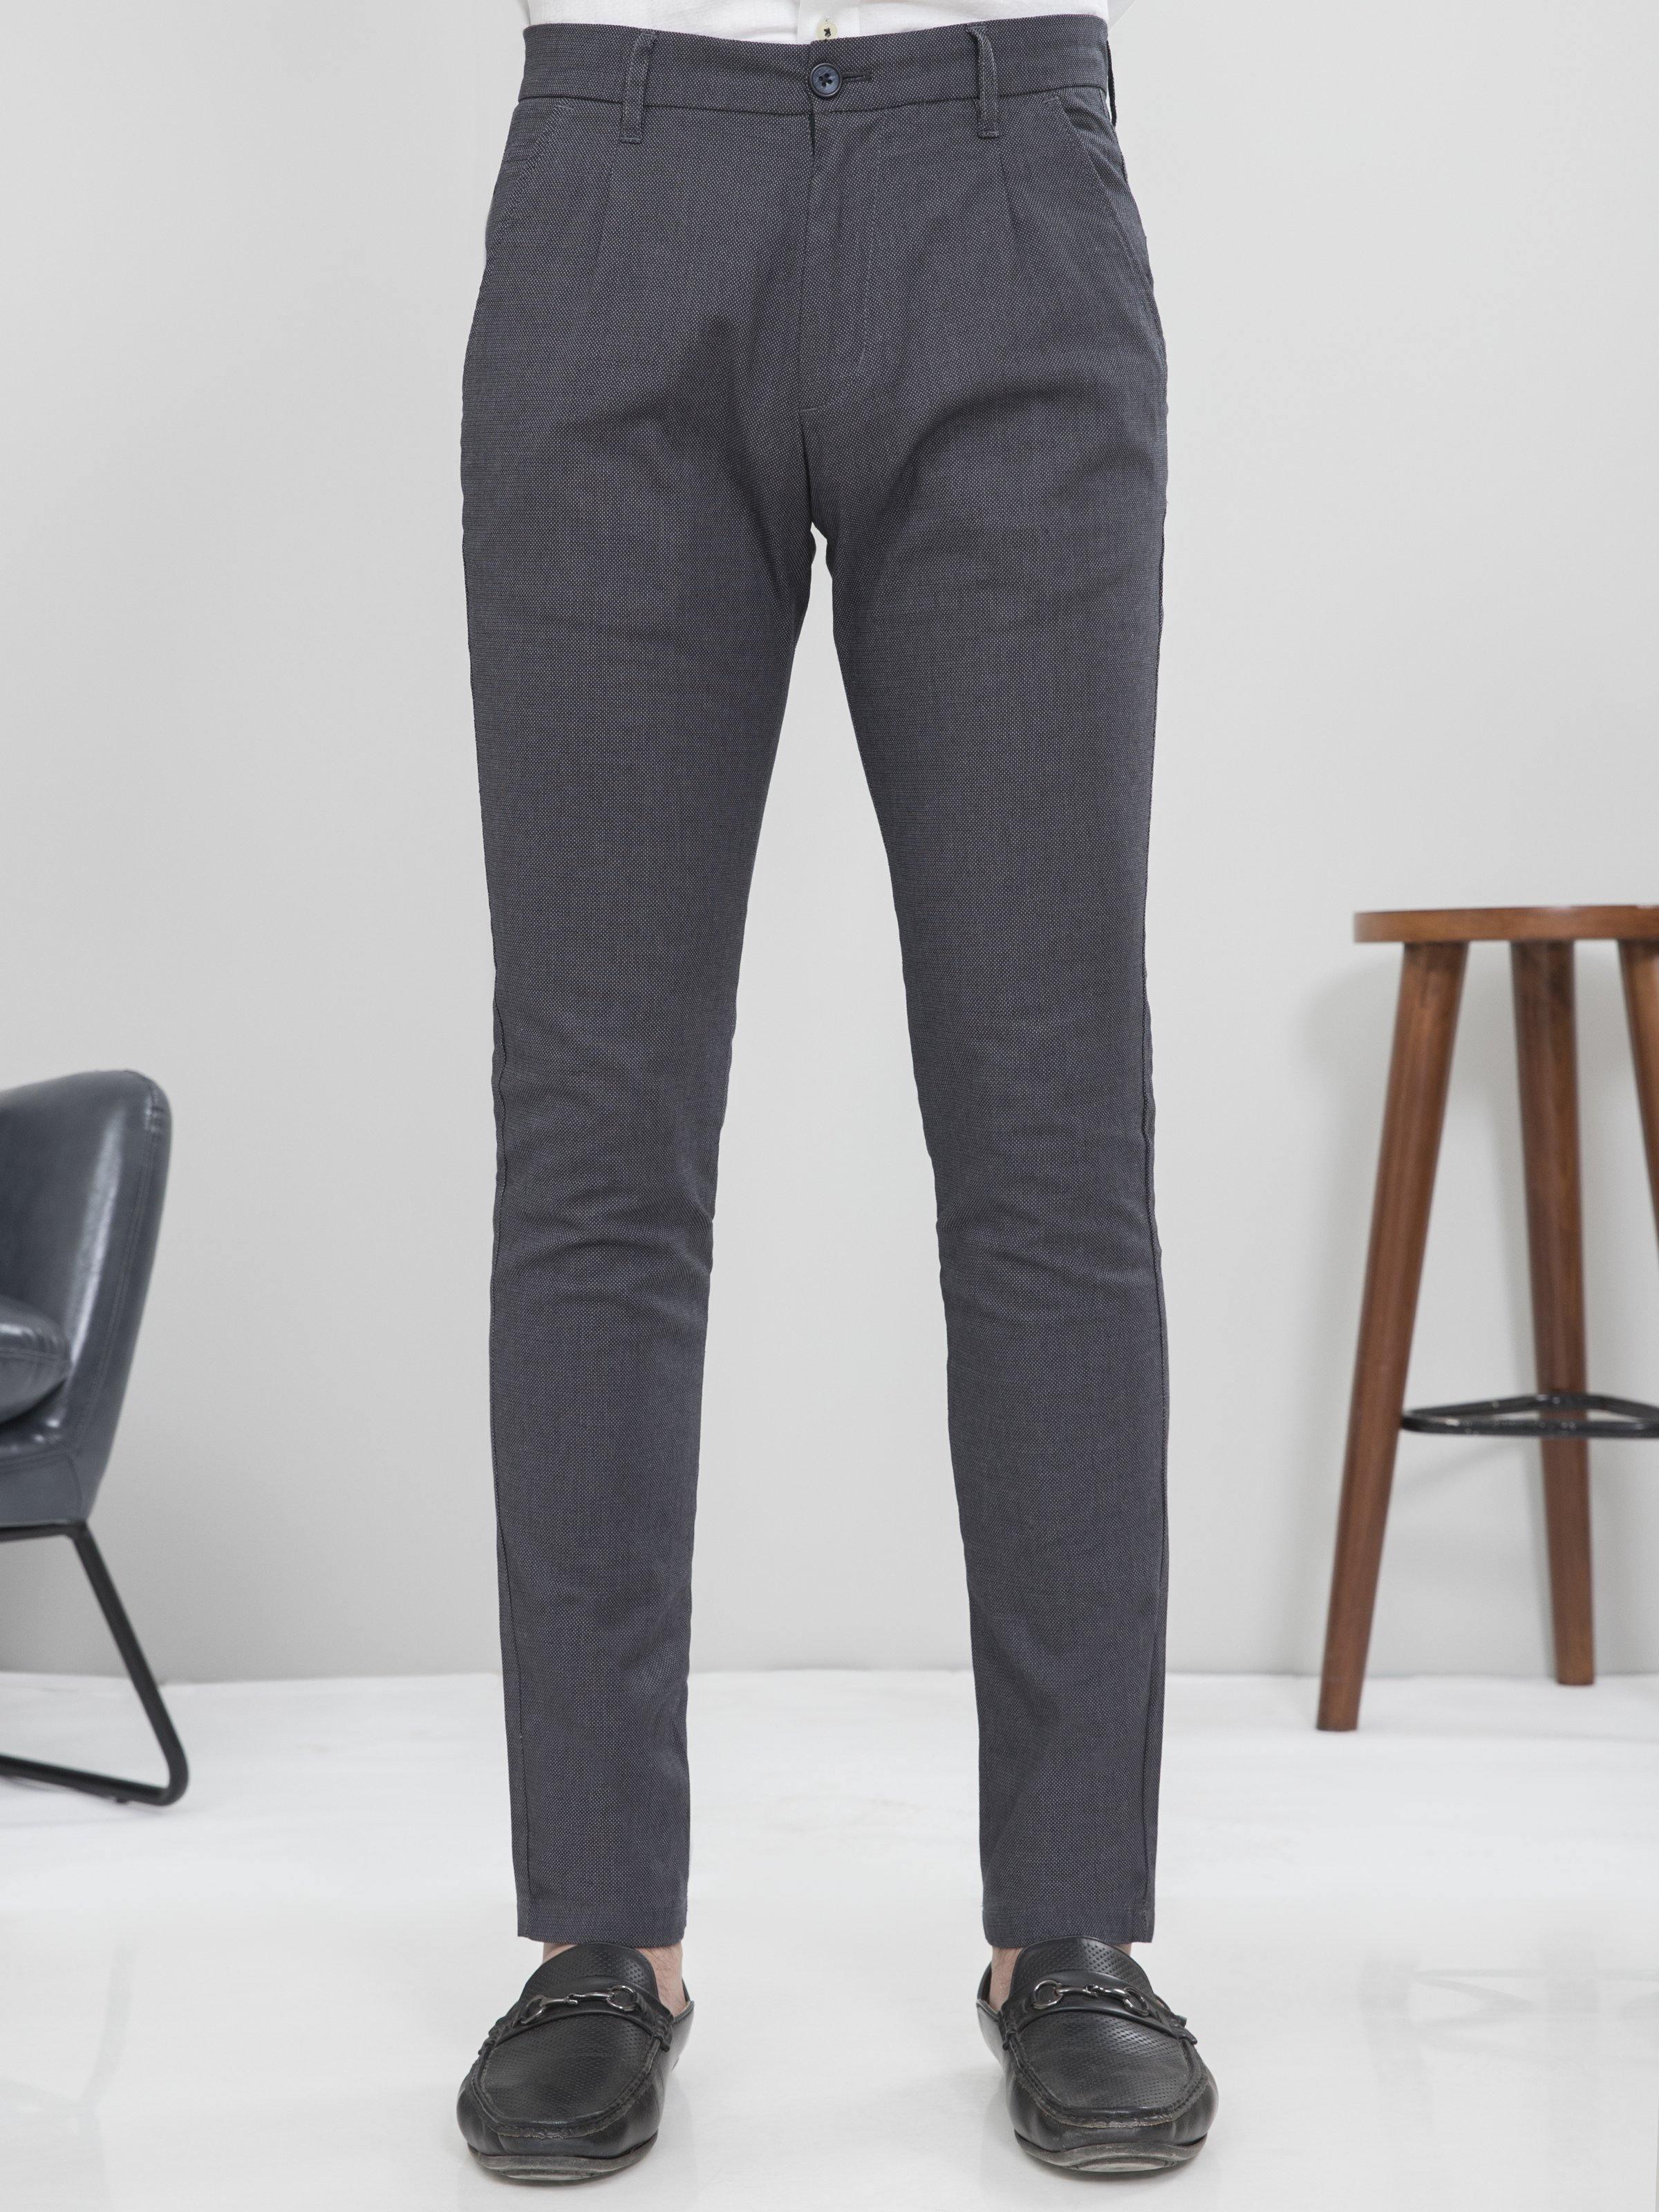 CASUAL PANT SLIM FIT BLUE BLACK at Charcoal Clothing